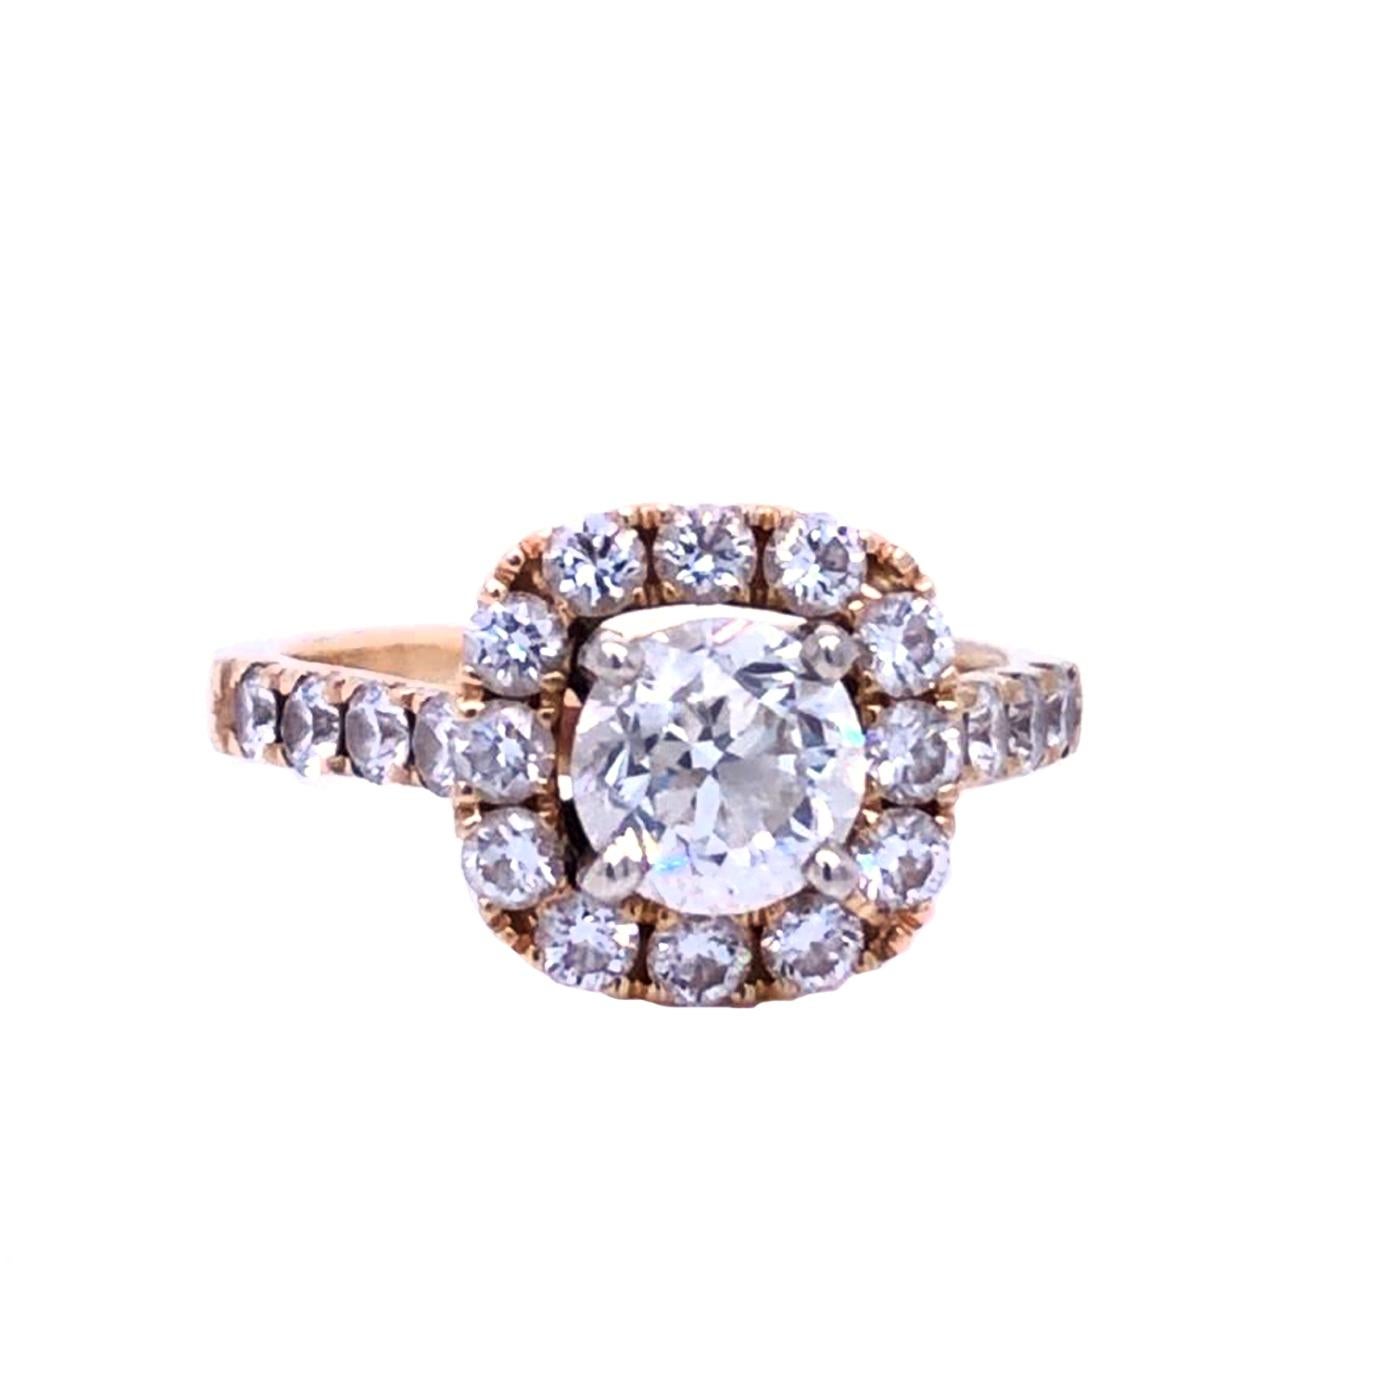 Classic Pave Gold Diamond ring 1.01 Carat center Round cut diamond Certified by Gia as I - Color, Si1 Clarity, accented by pave Round Diamonds, Totaling 0.65 carat G color, VS1 - Clarity, The ring weighs 4.3 grams of 14Karat Gold, and is currently